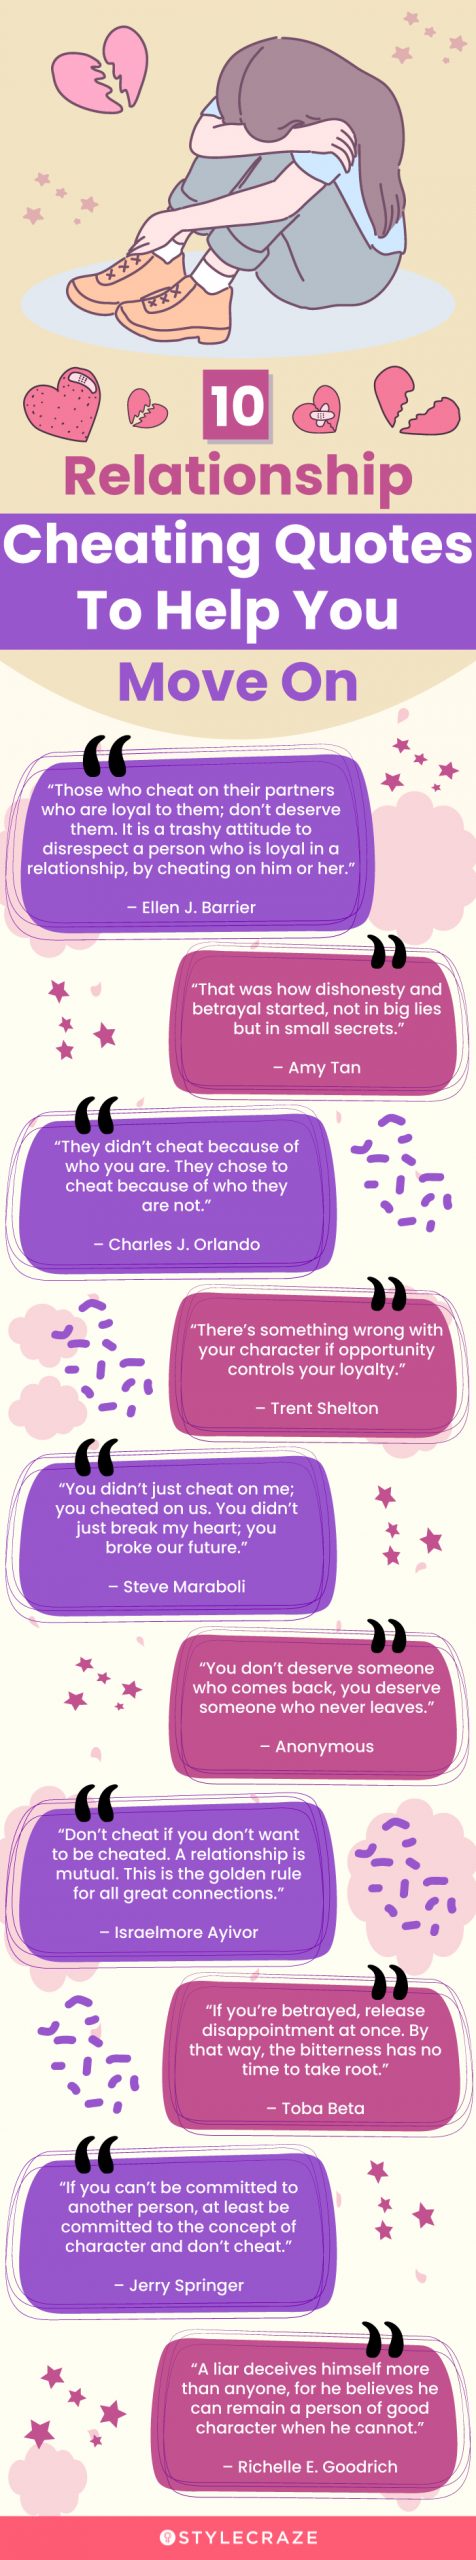 10 relationship cheating quotes to help you move on (infographic)